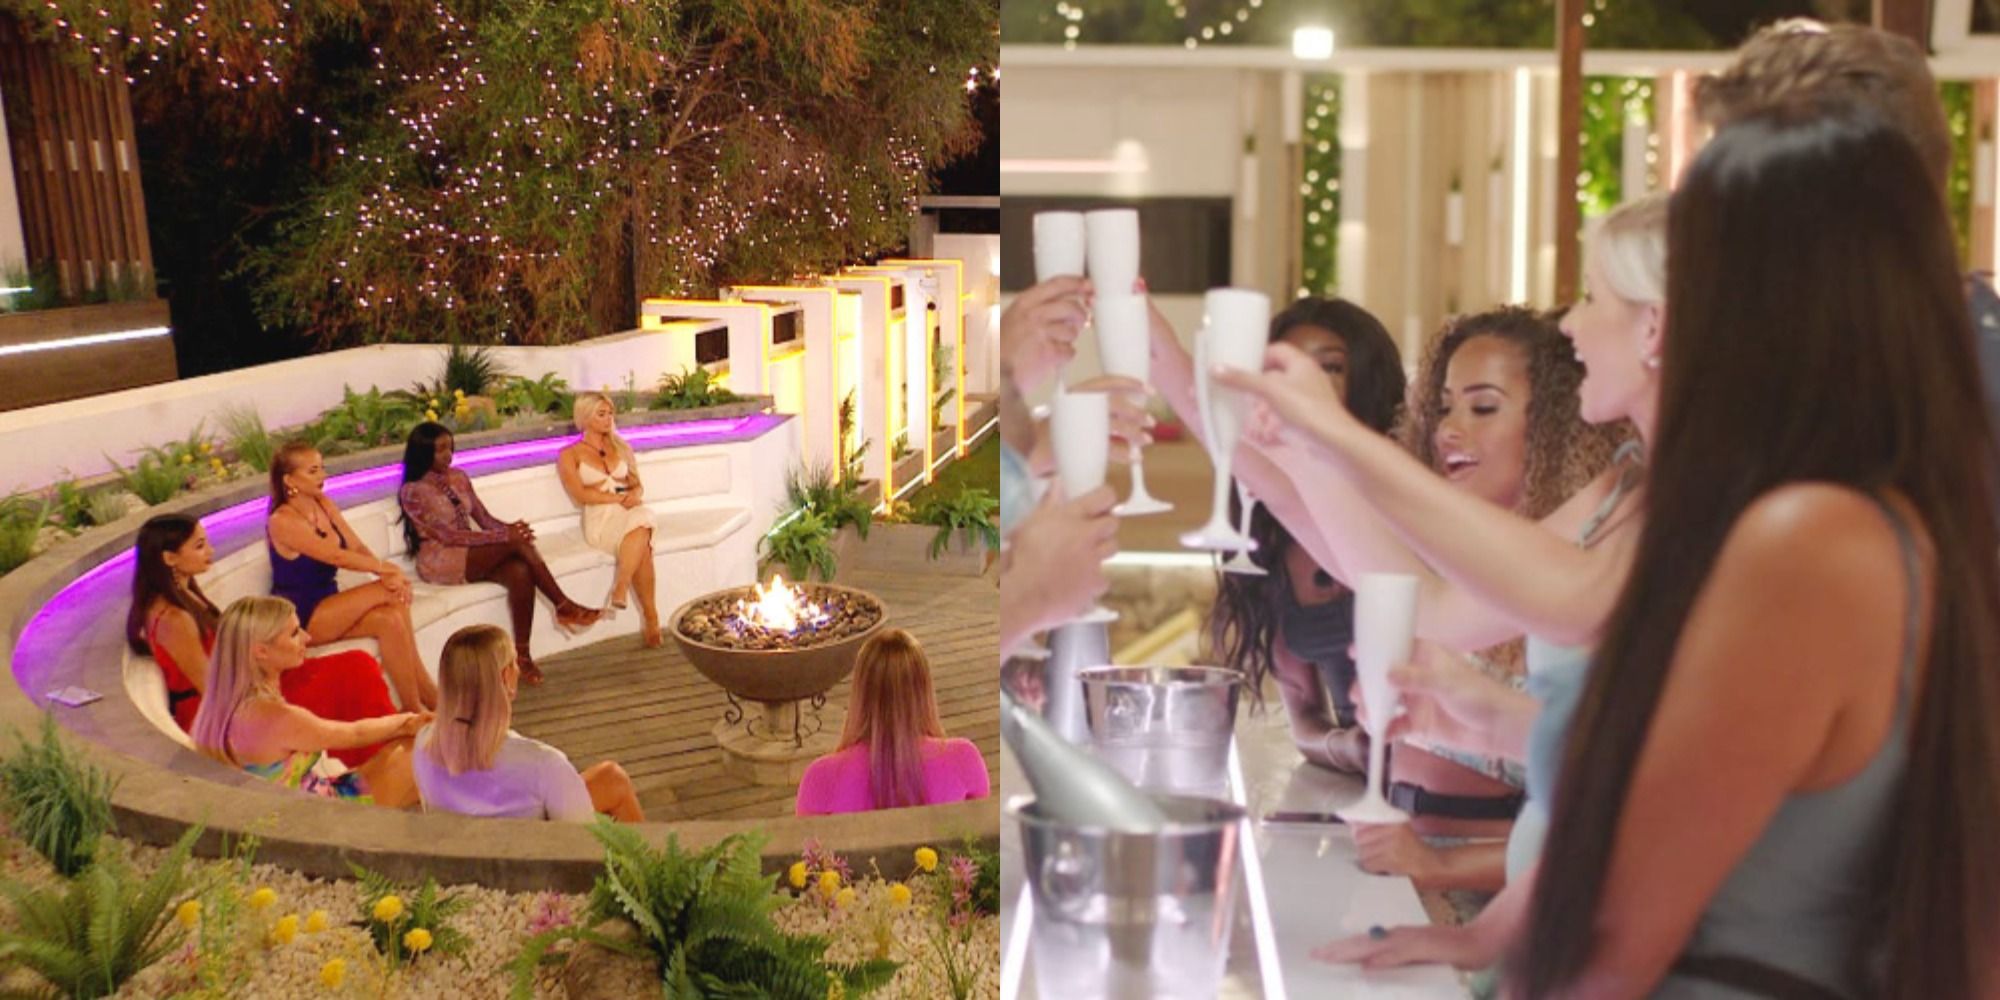 Split image of a recoupling ceremony and Love Island contestants drinking